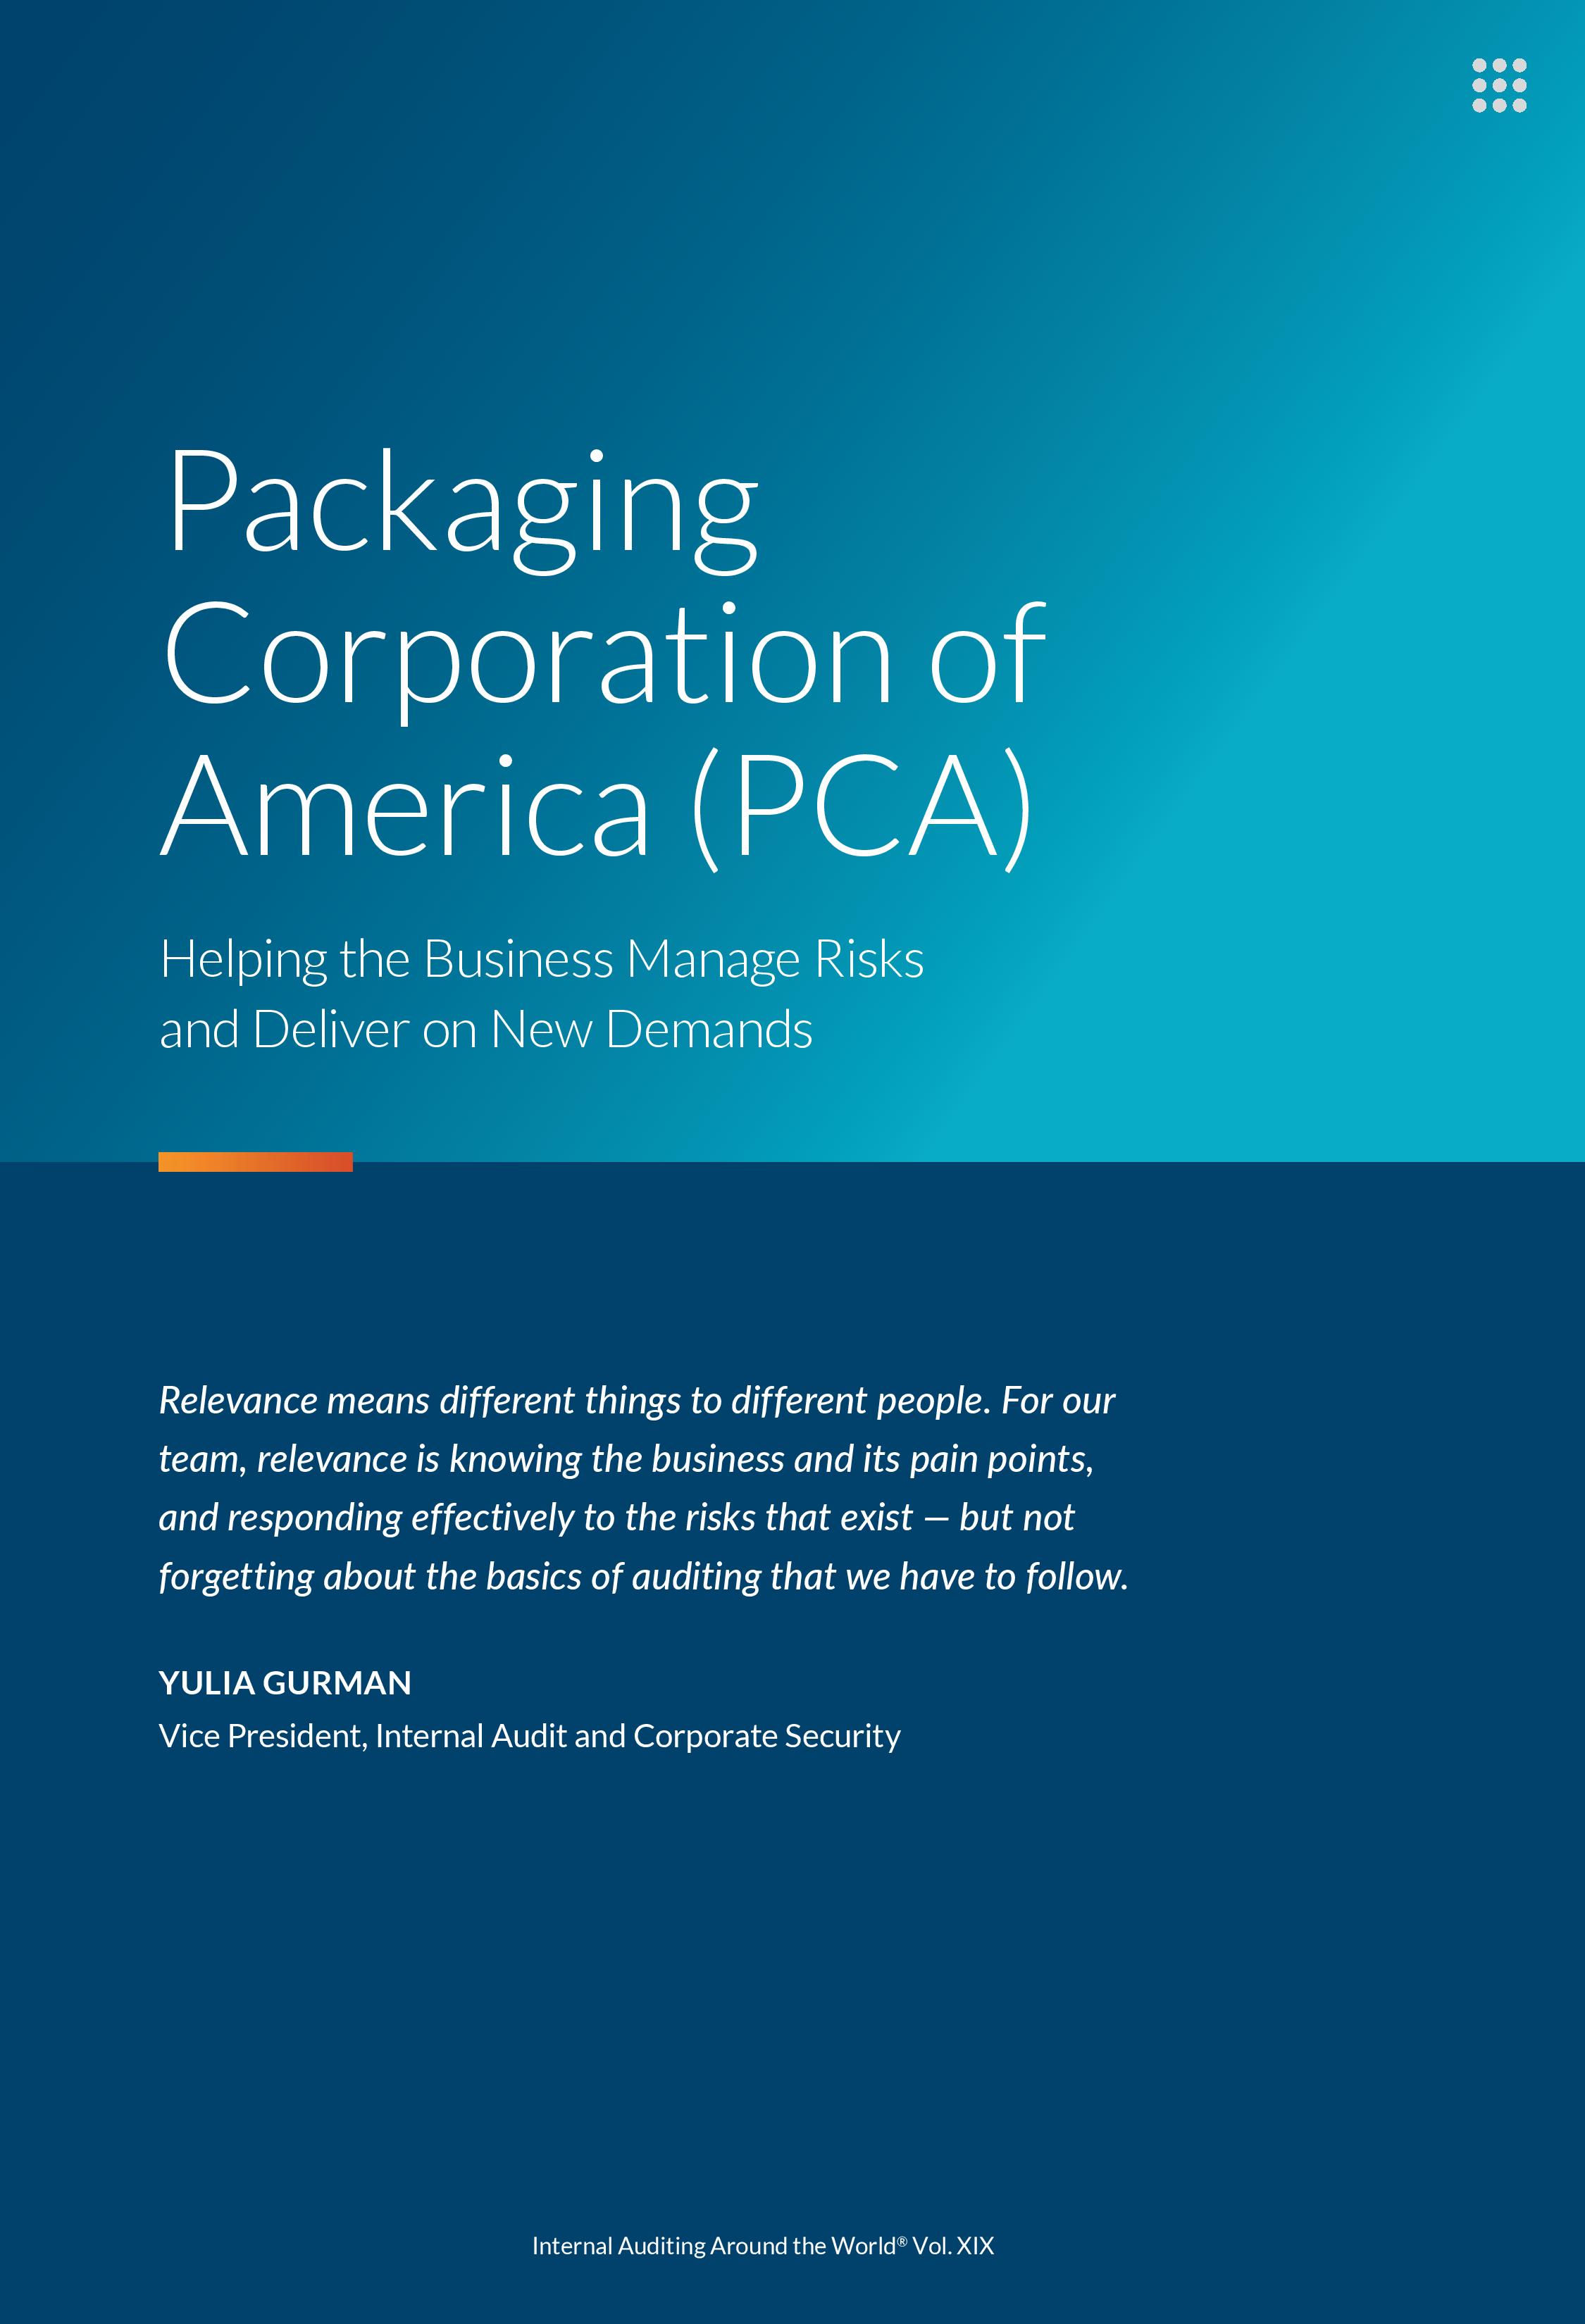 screenshot of the first page of Packaging Corporation of America (PCA) Helping the Business Manage Risks and Deliver on New Demands